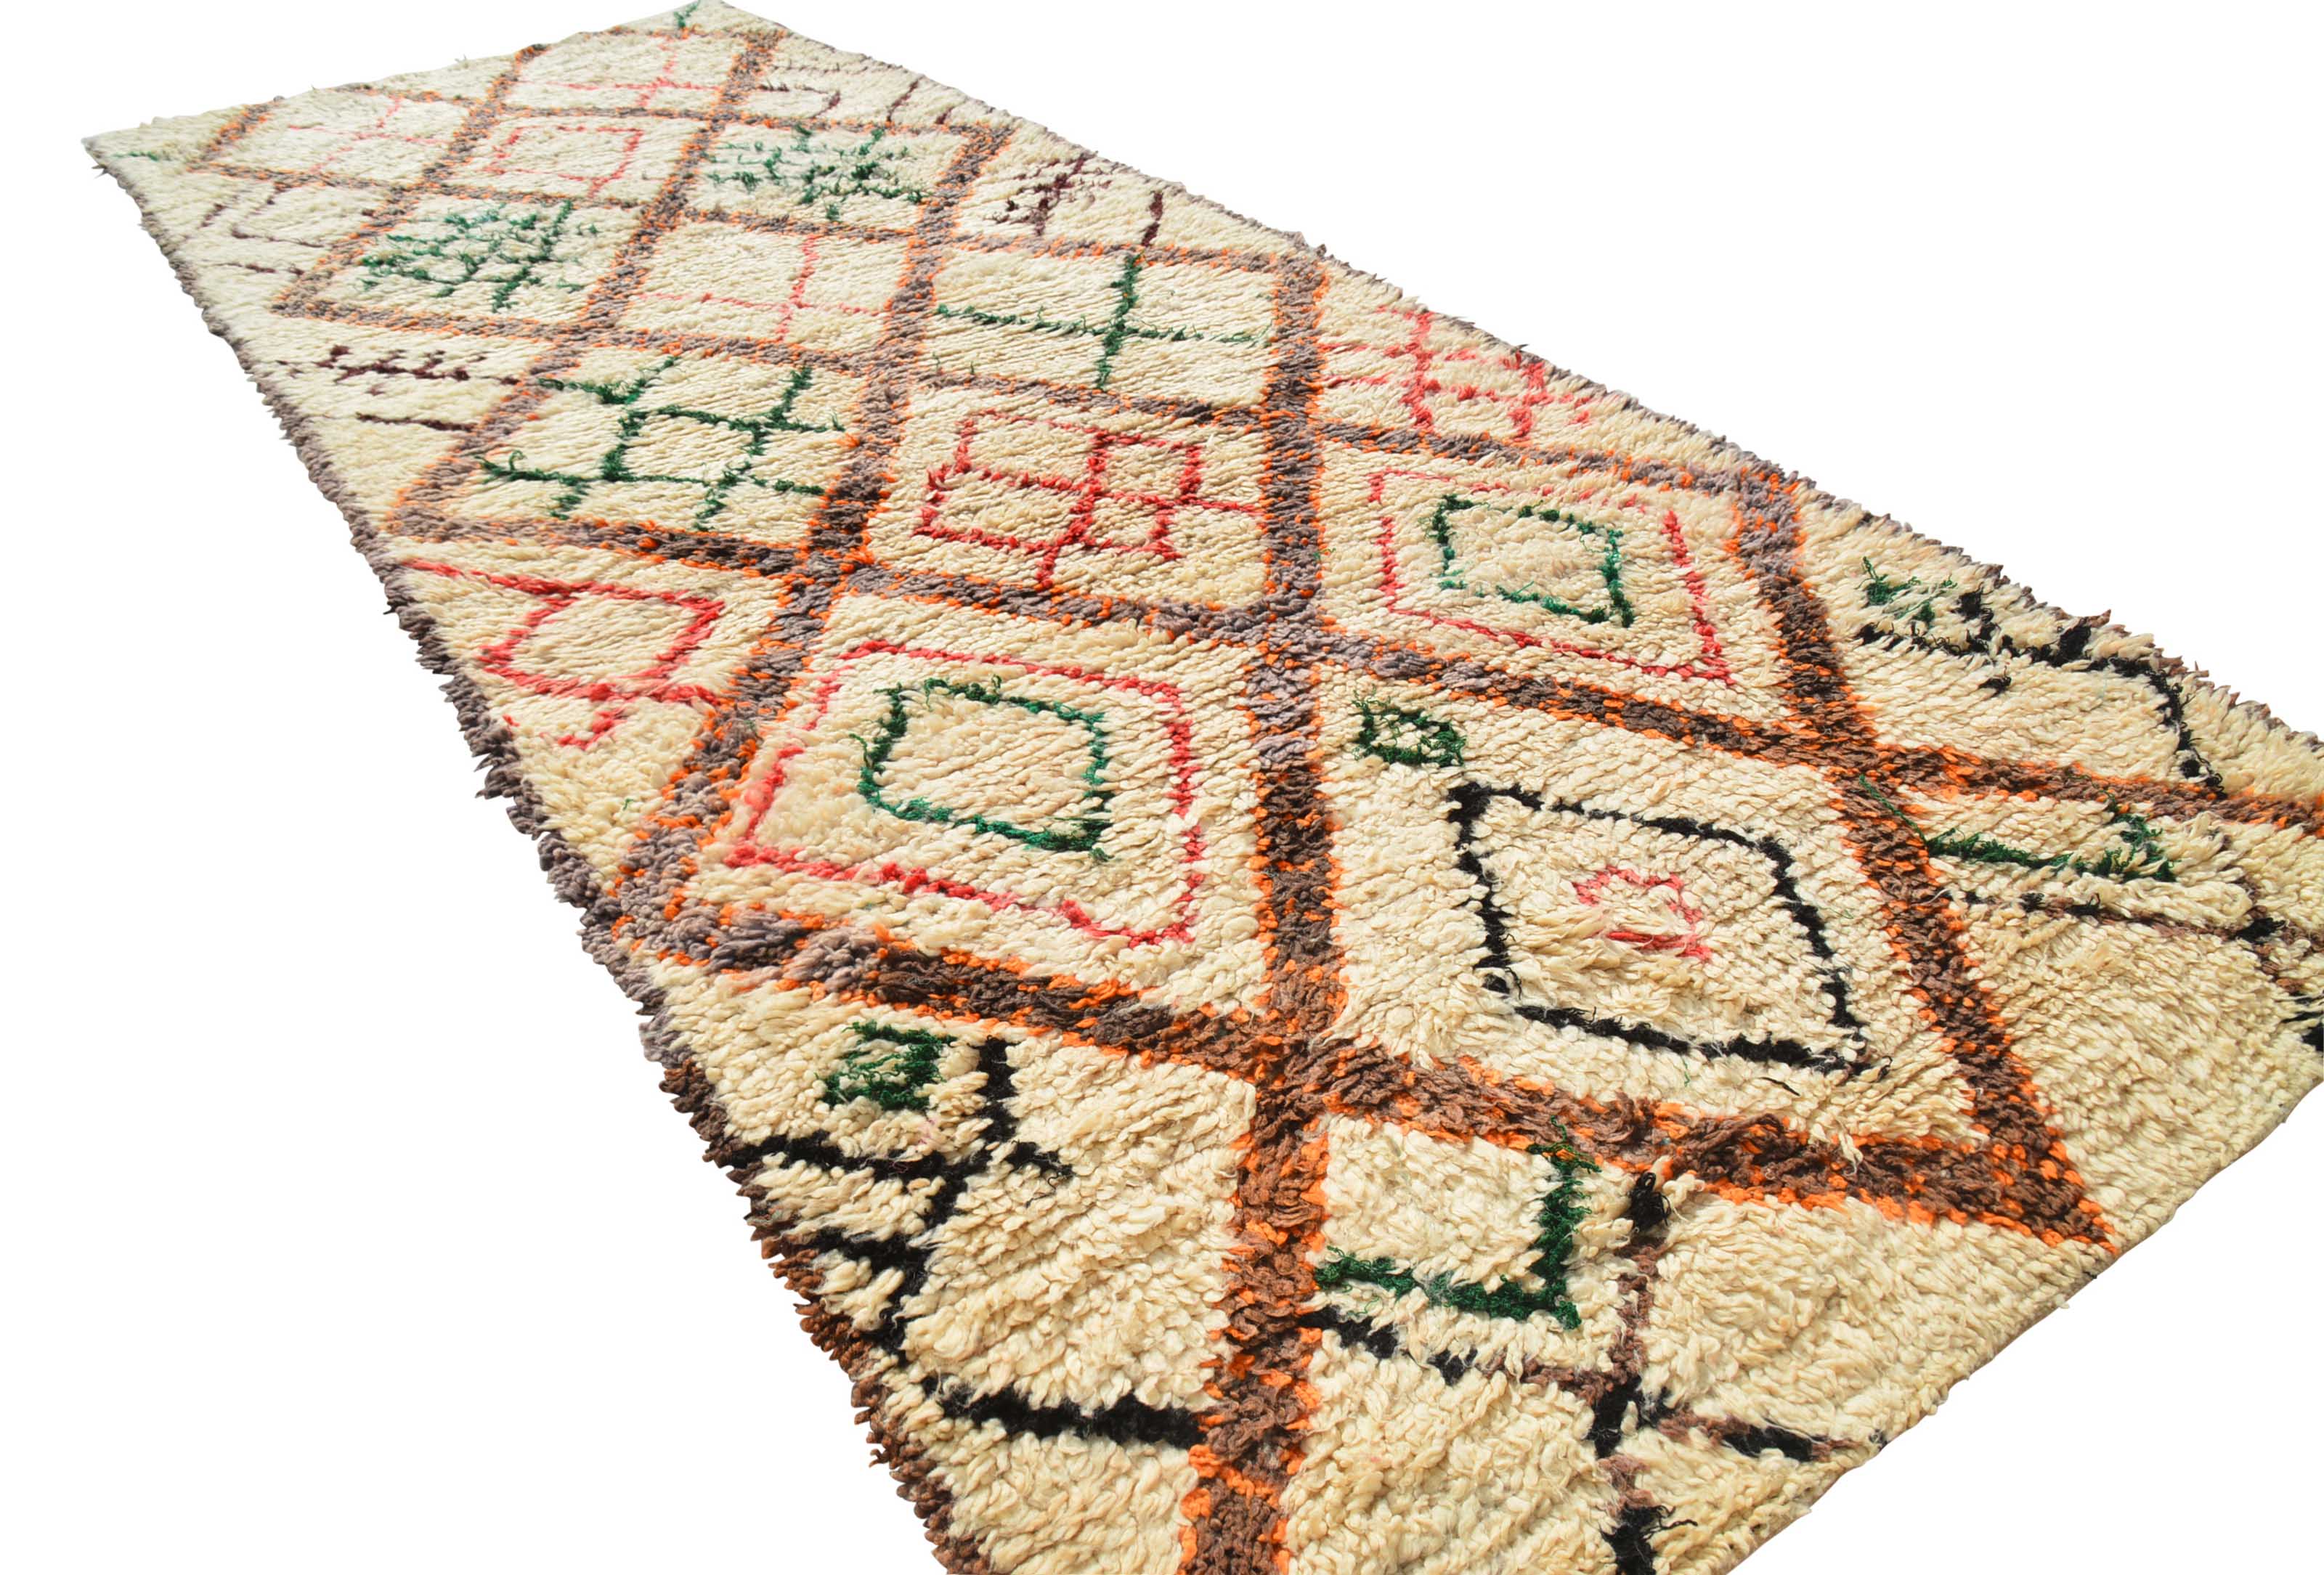 Vintage Moroccan Rug Vintage Style Area Rugs | Vintage Floral Area Rugs illuminate collective